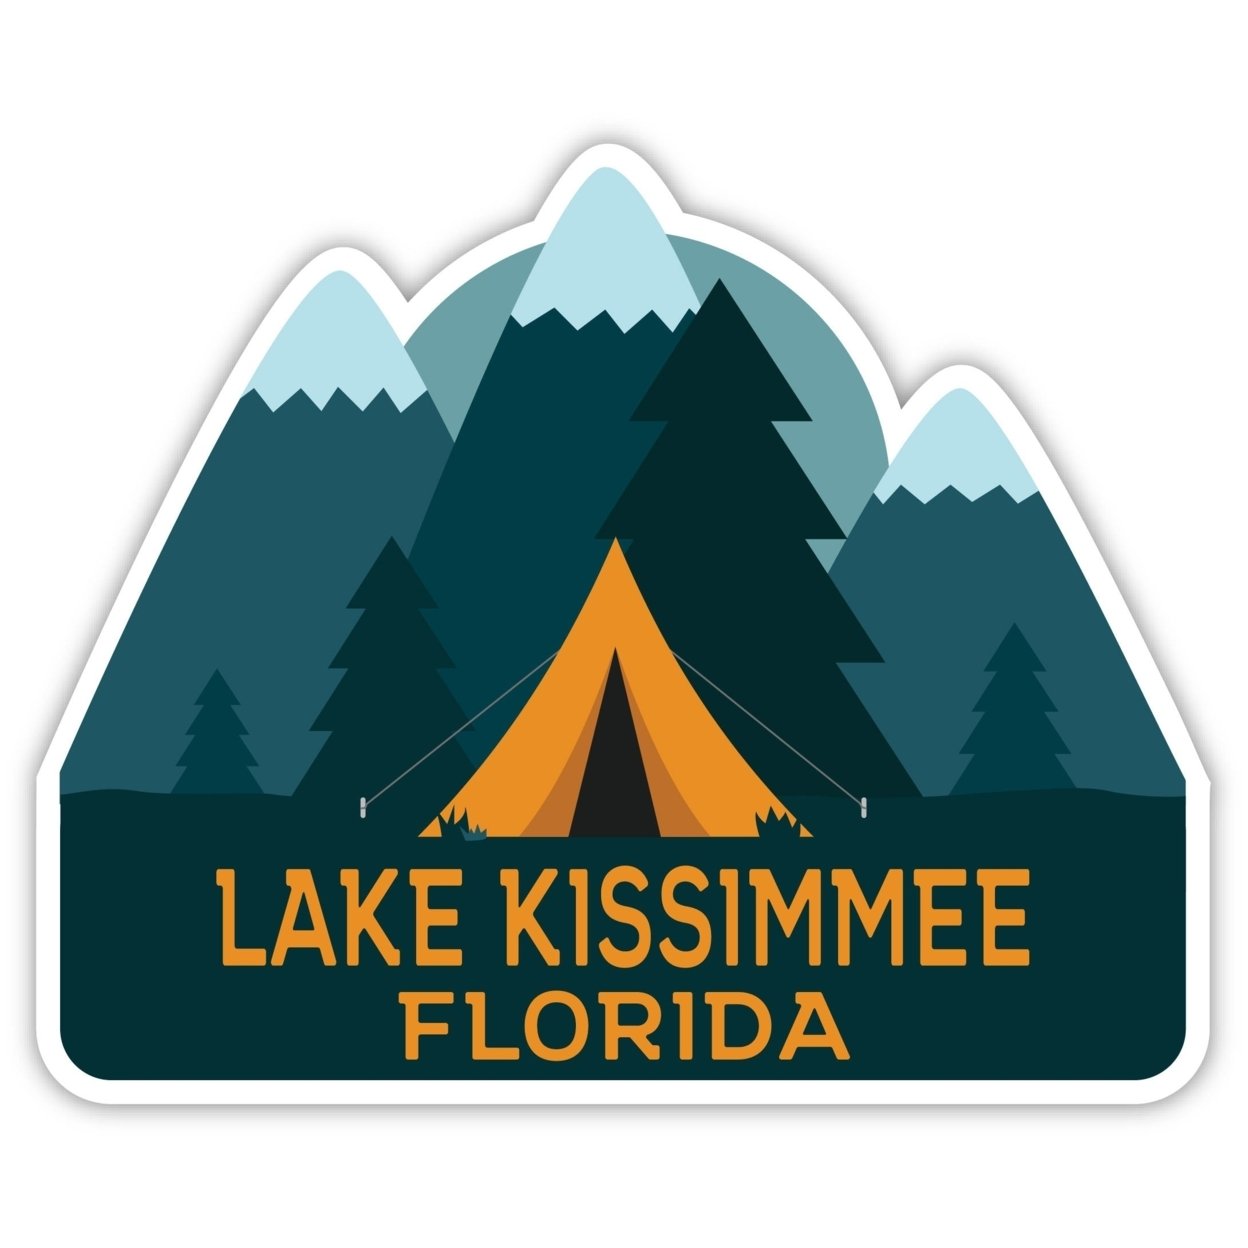 Lake Kissimmee Florida Souvenir Decorative Stickers (Choose Theme And Size) - 2-Inch, Tent